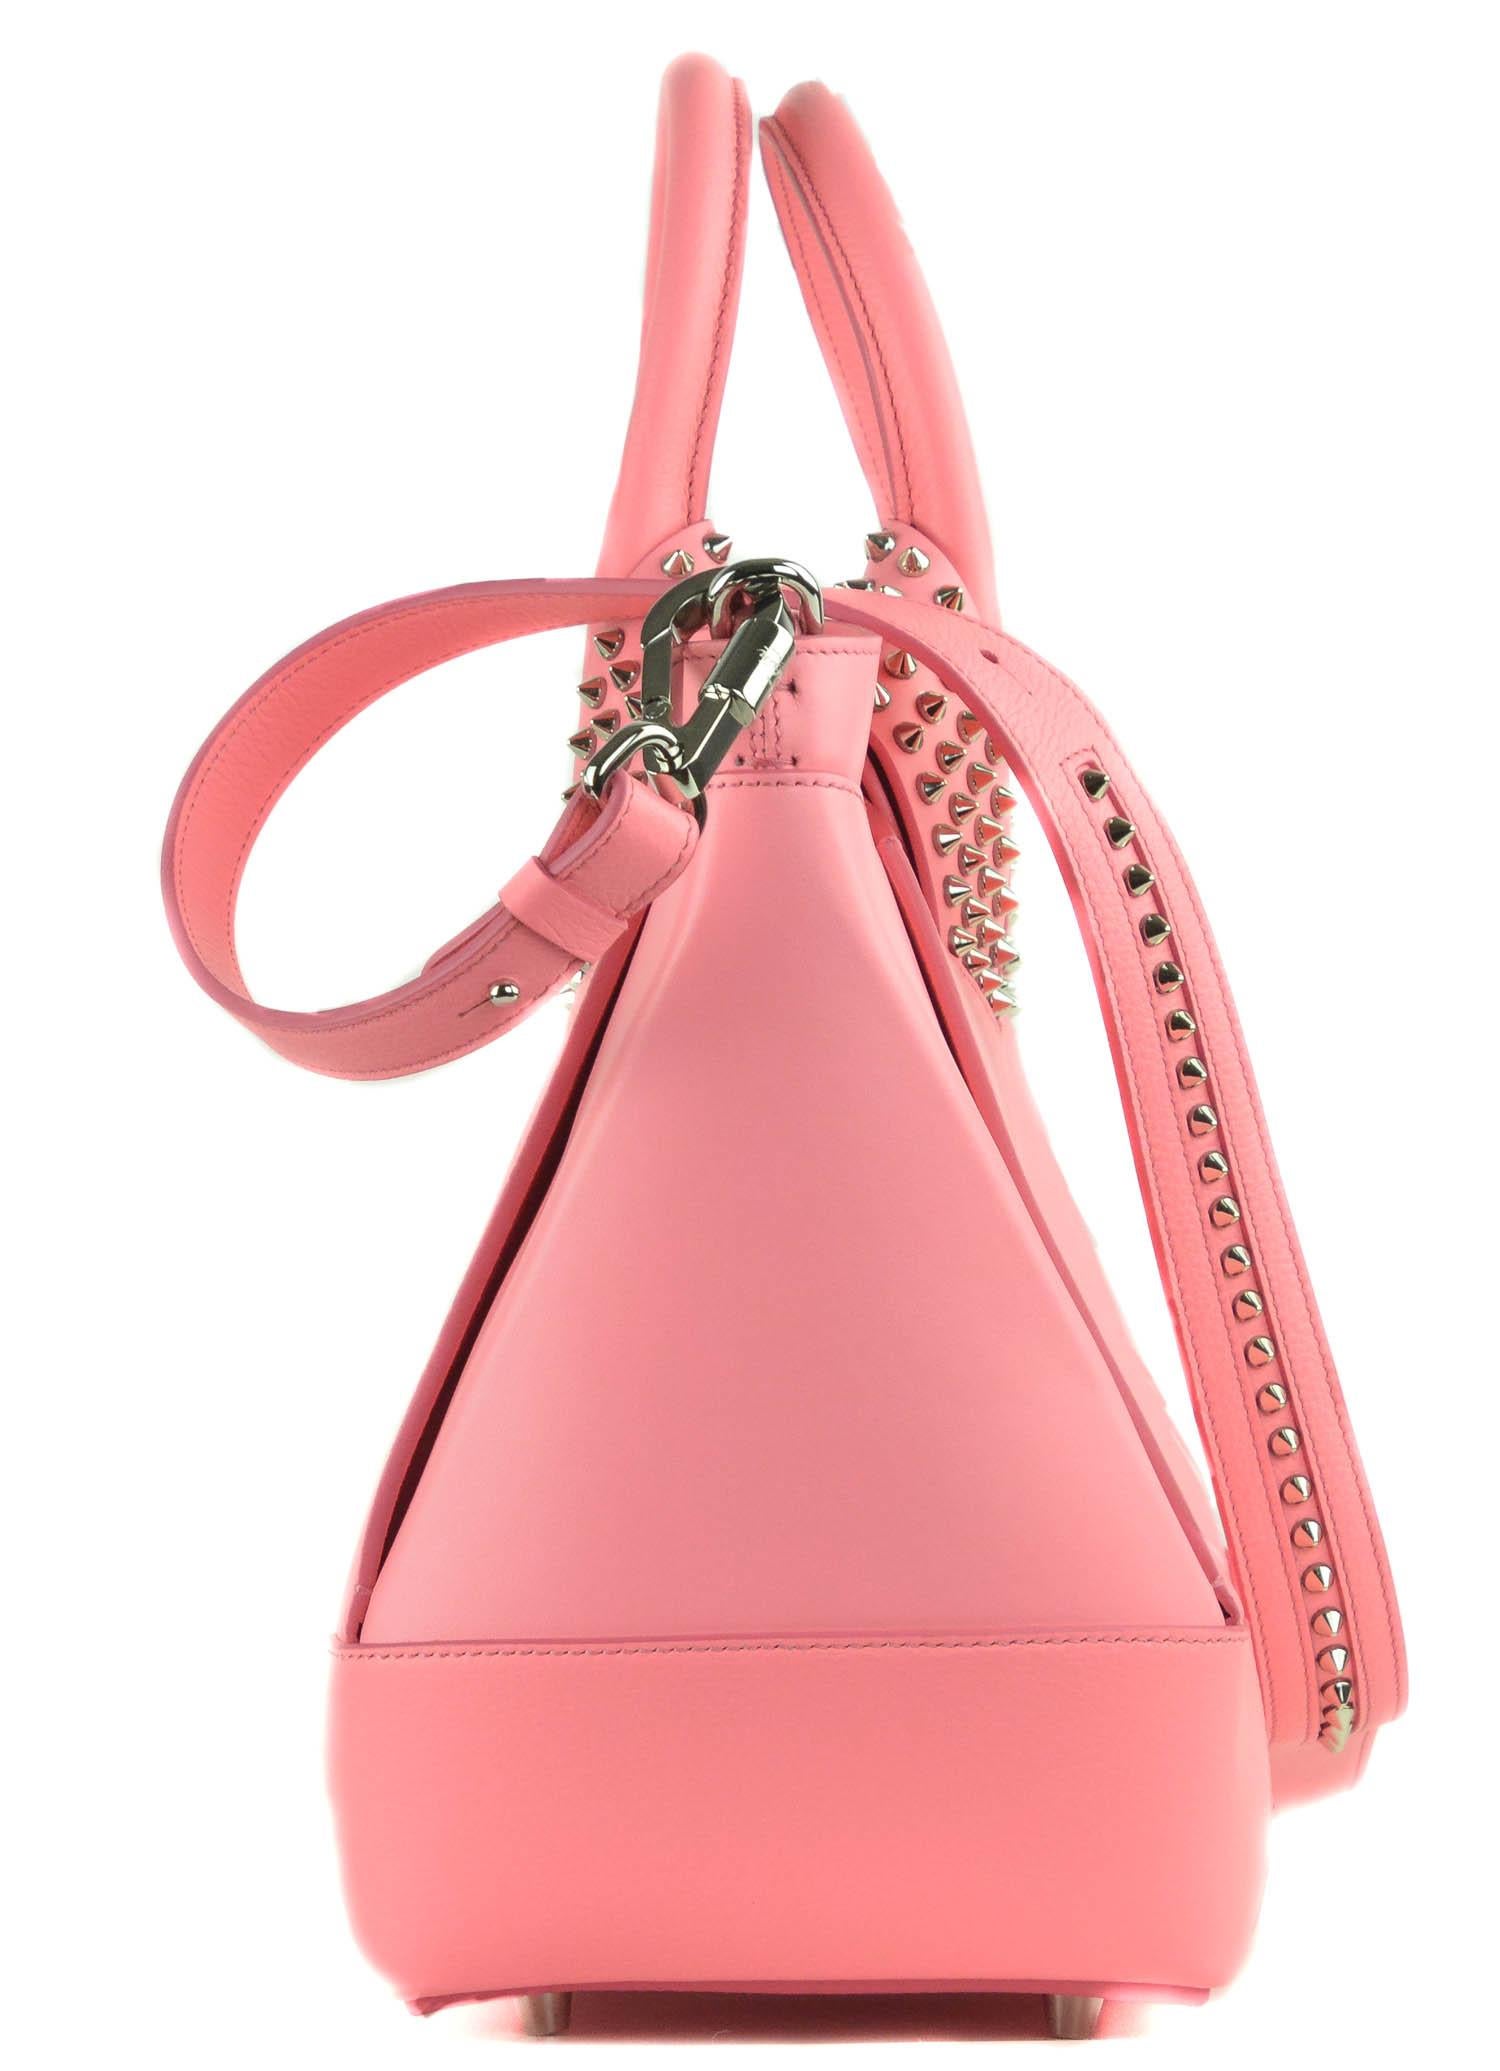 Christian Louboutin Women's Eloise Pink Large Tote For Sale 1